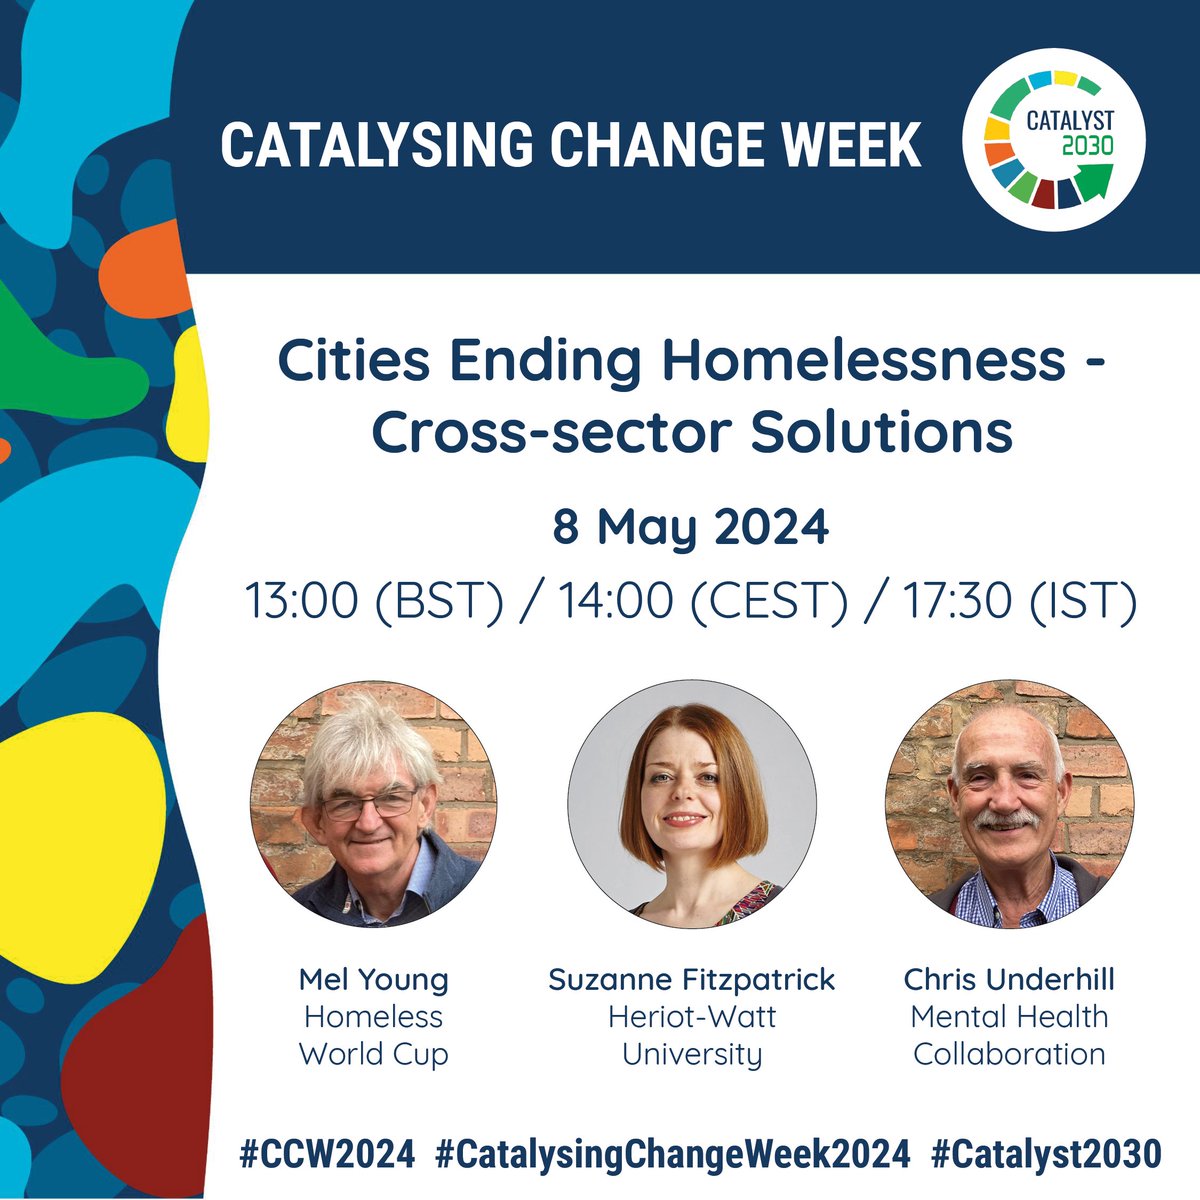 Ending global #homelessness needs everyone to work across sectors. Let's talk about solutions that are working and bring you #innovative ideas to our Cities Ending Homelessness webinar on Wed (8 May): catalyst2030.net/events/cities-… @ISPHERE_HWU @Catalyst_2030 #CatalysingChangeWeek2024